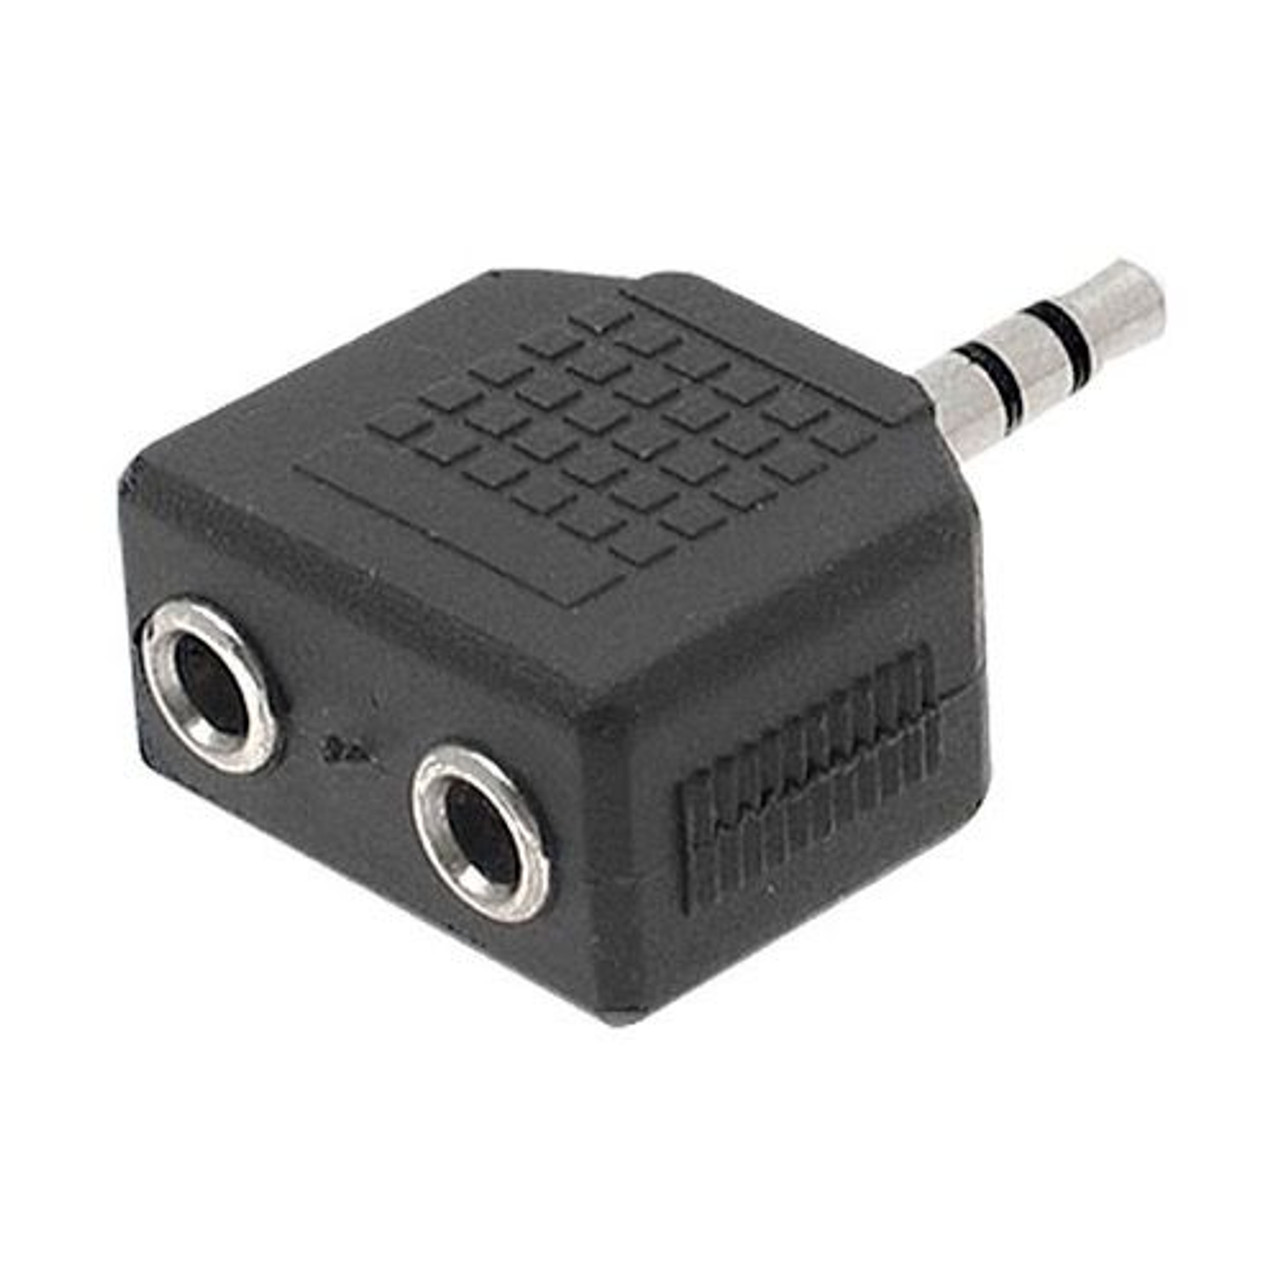 Steren 251-130 Dual 3.5mm Stereo Audio Jack to One 3.5mm Plug Y Adapter Splitter Connector Dual Output from Single Input Source Headphone Audio Jack Signal MP3 Plug Connector, Part # 251130